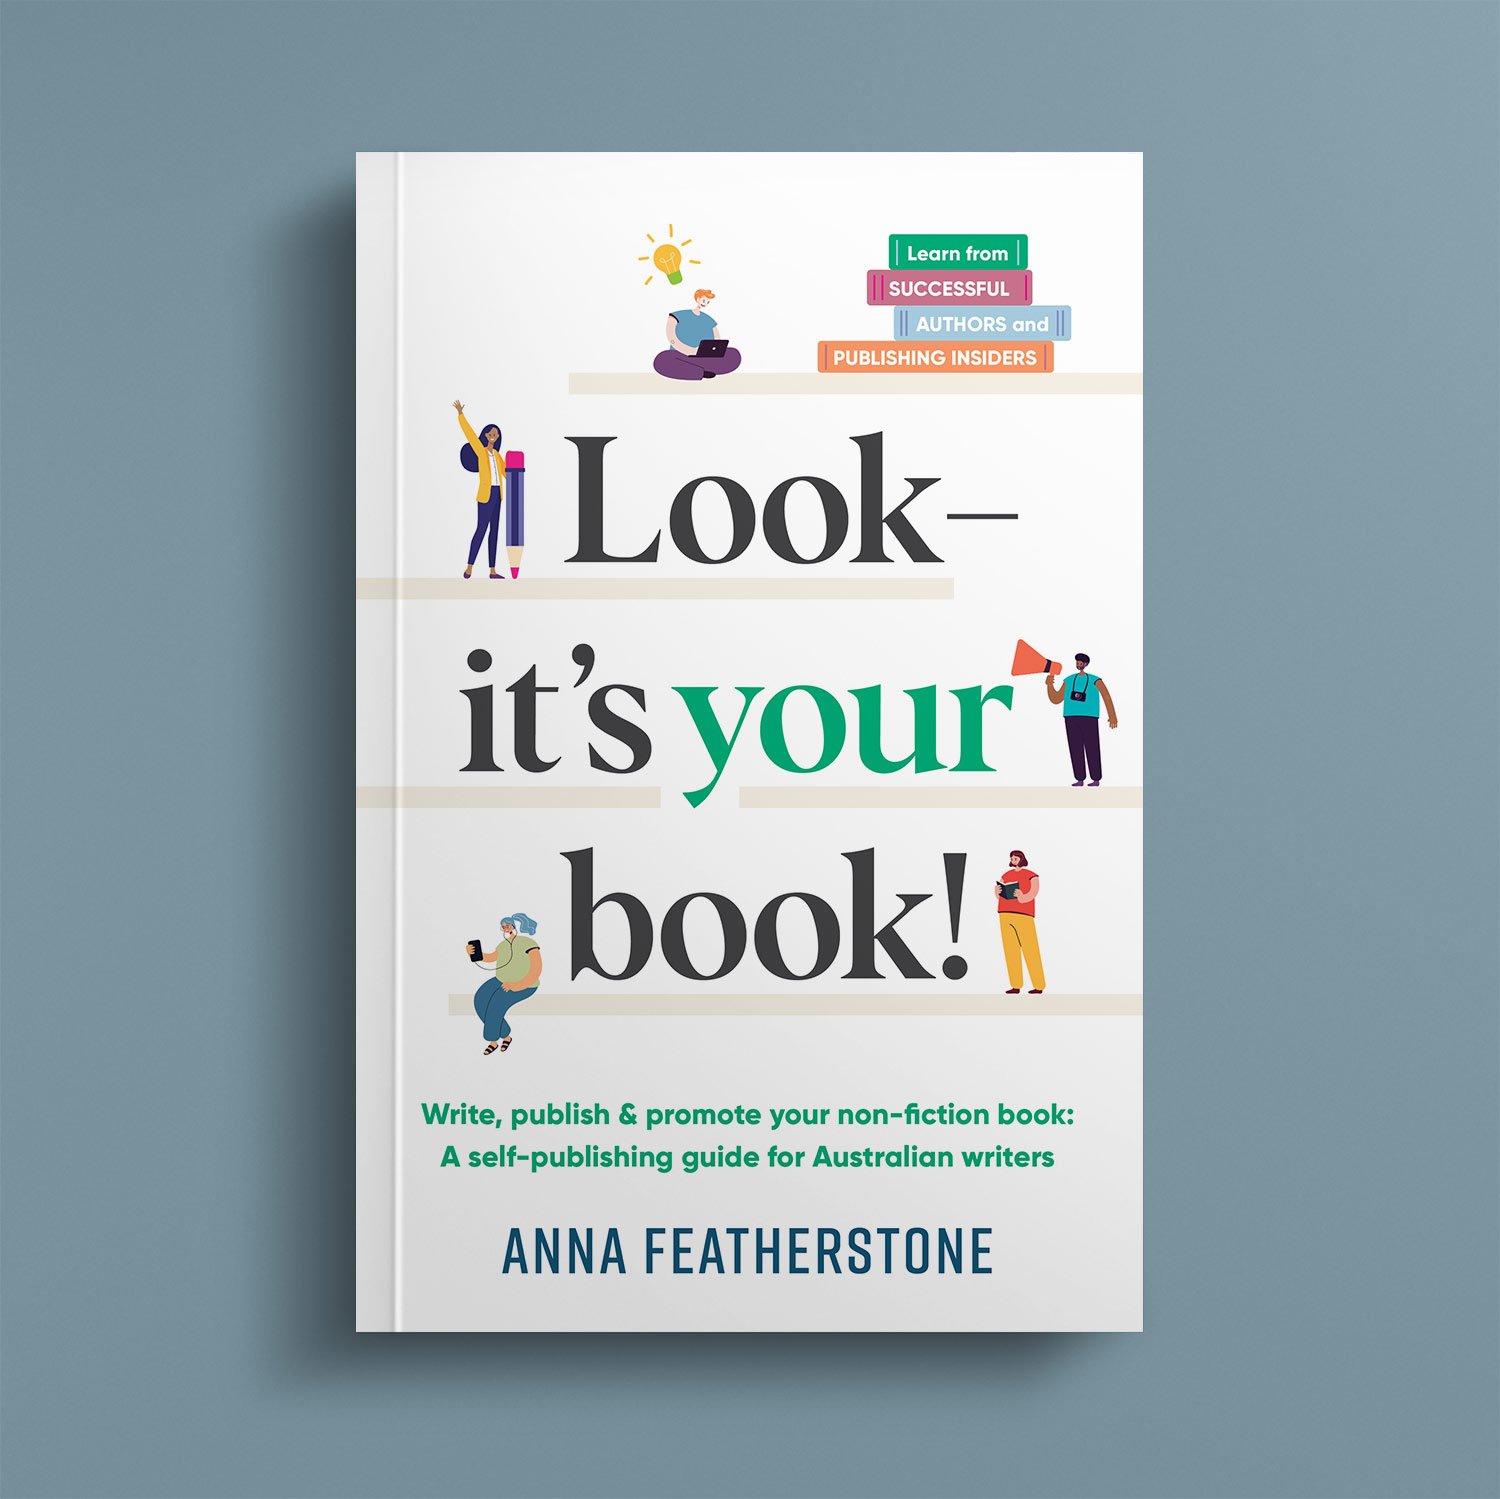 Book cover design tips for self-publishers | Tess McCabe